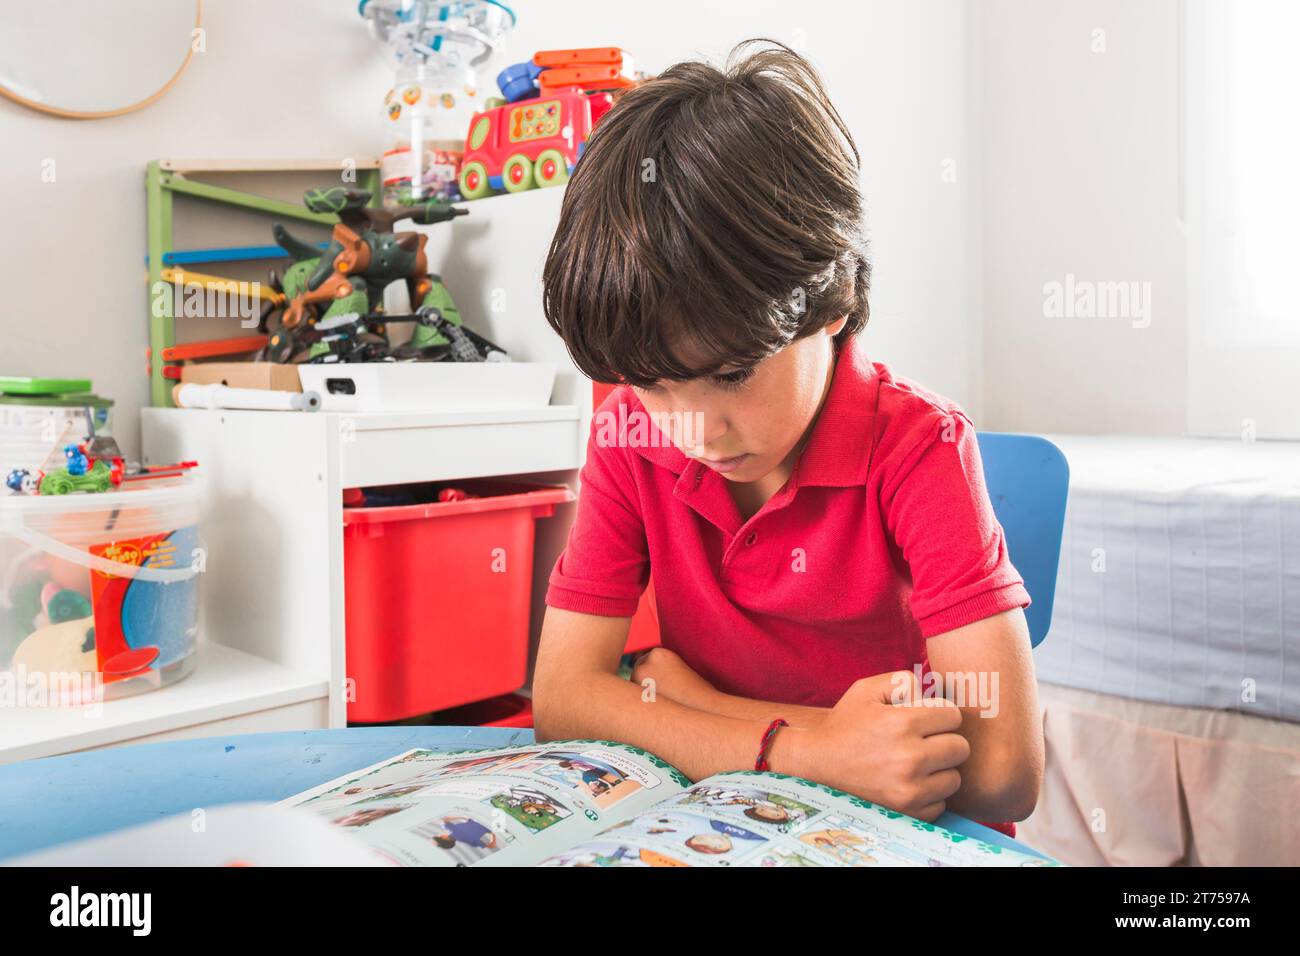 Child reading book table Stock Photo